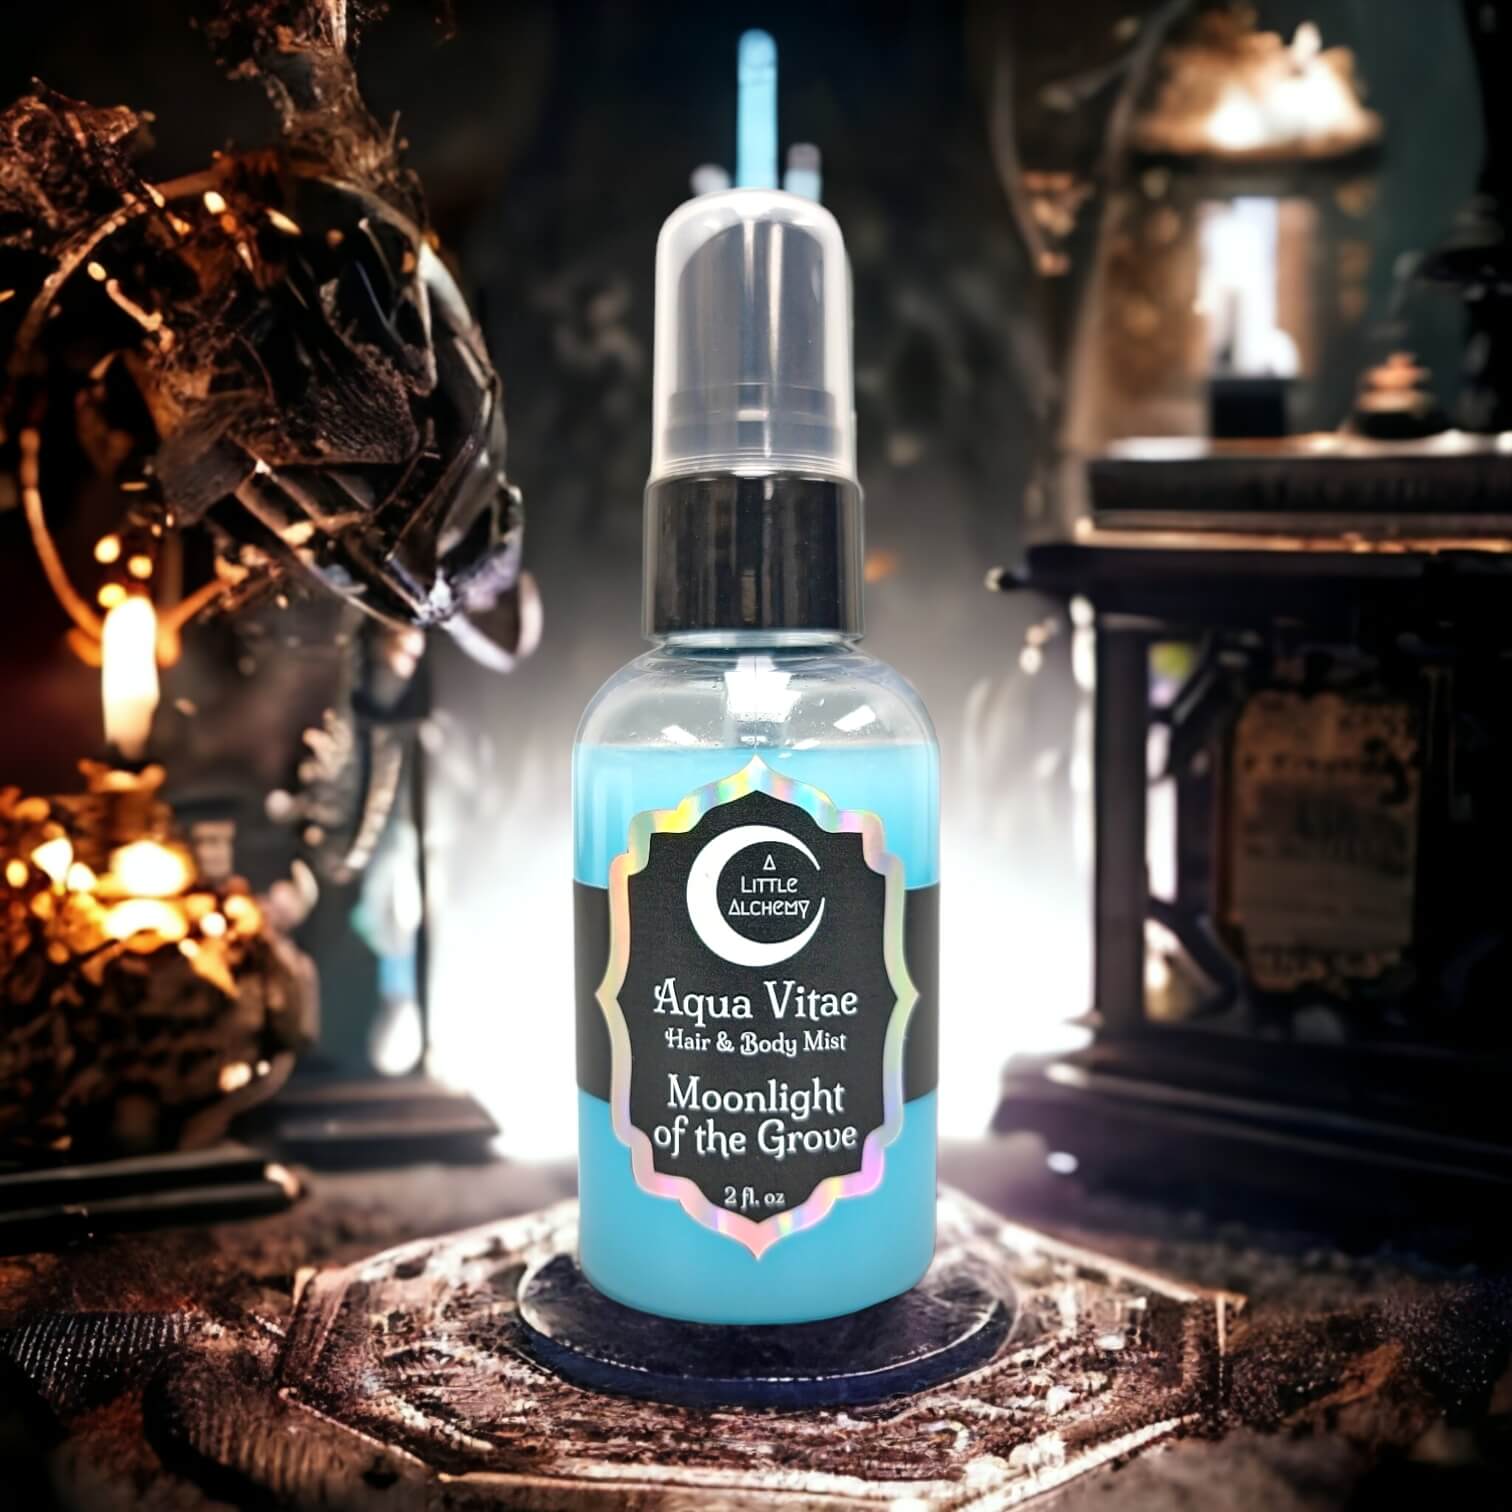 our aqua vitae body mist in the scent Moonlight of the Grove.